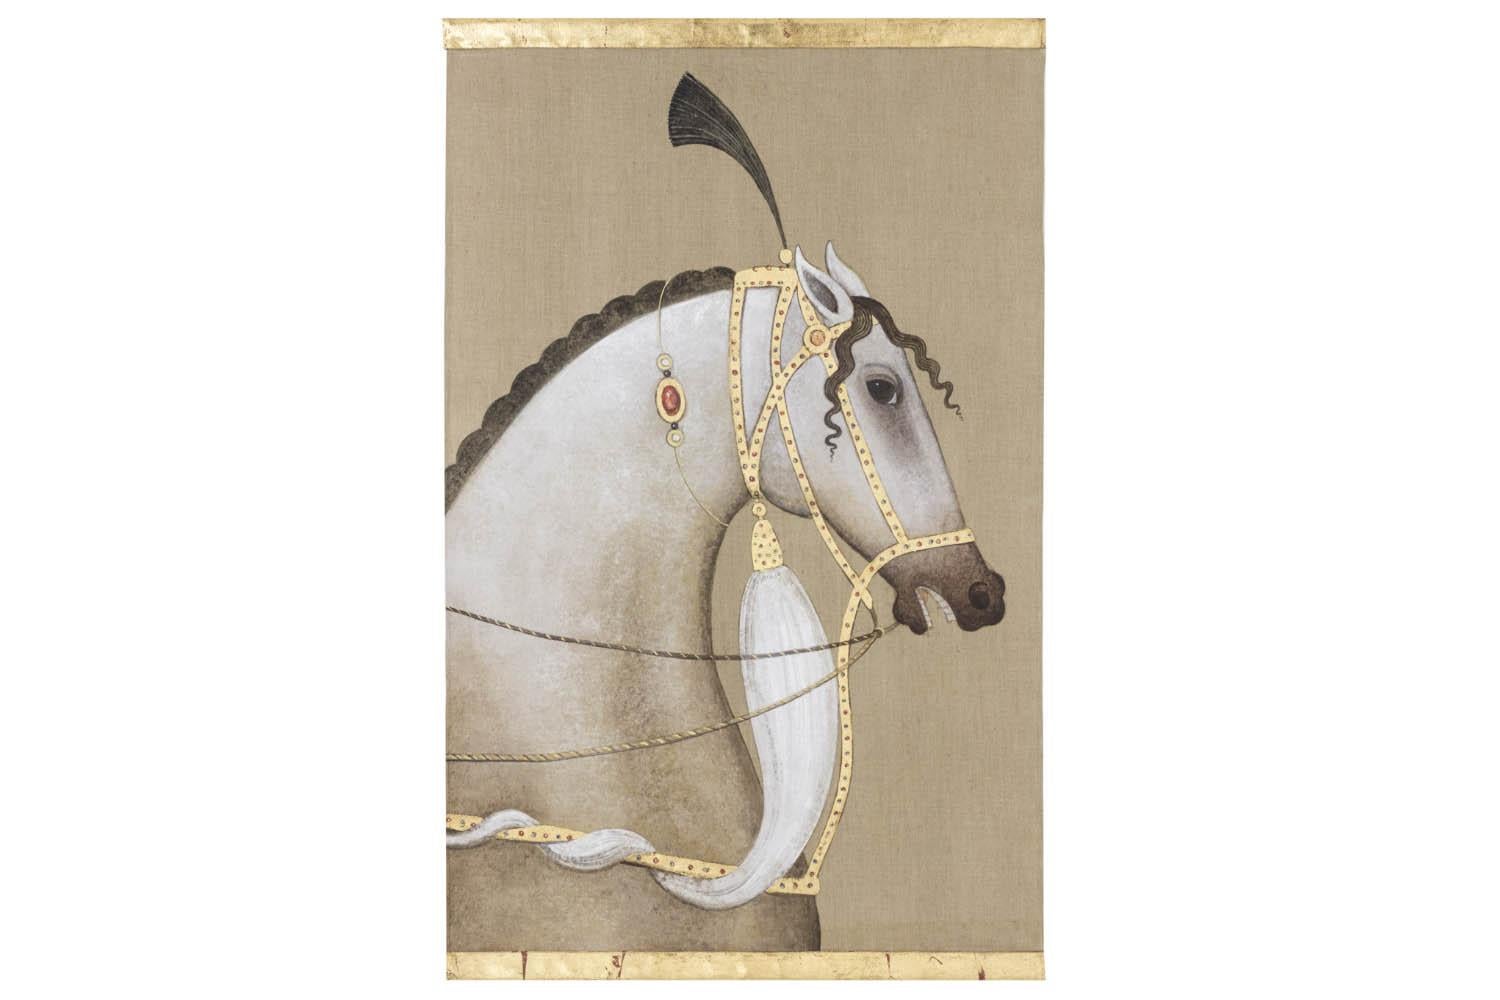 Painted canvas figuring a side view white Arabian horse. It wears a gilt harness adorned with blue and red stones and a white fabric swirled around its chest and a plume on its head. Brown background.

Linen raw canvas hand painted with natural